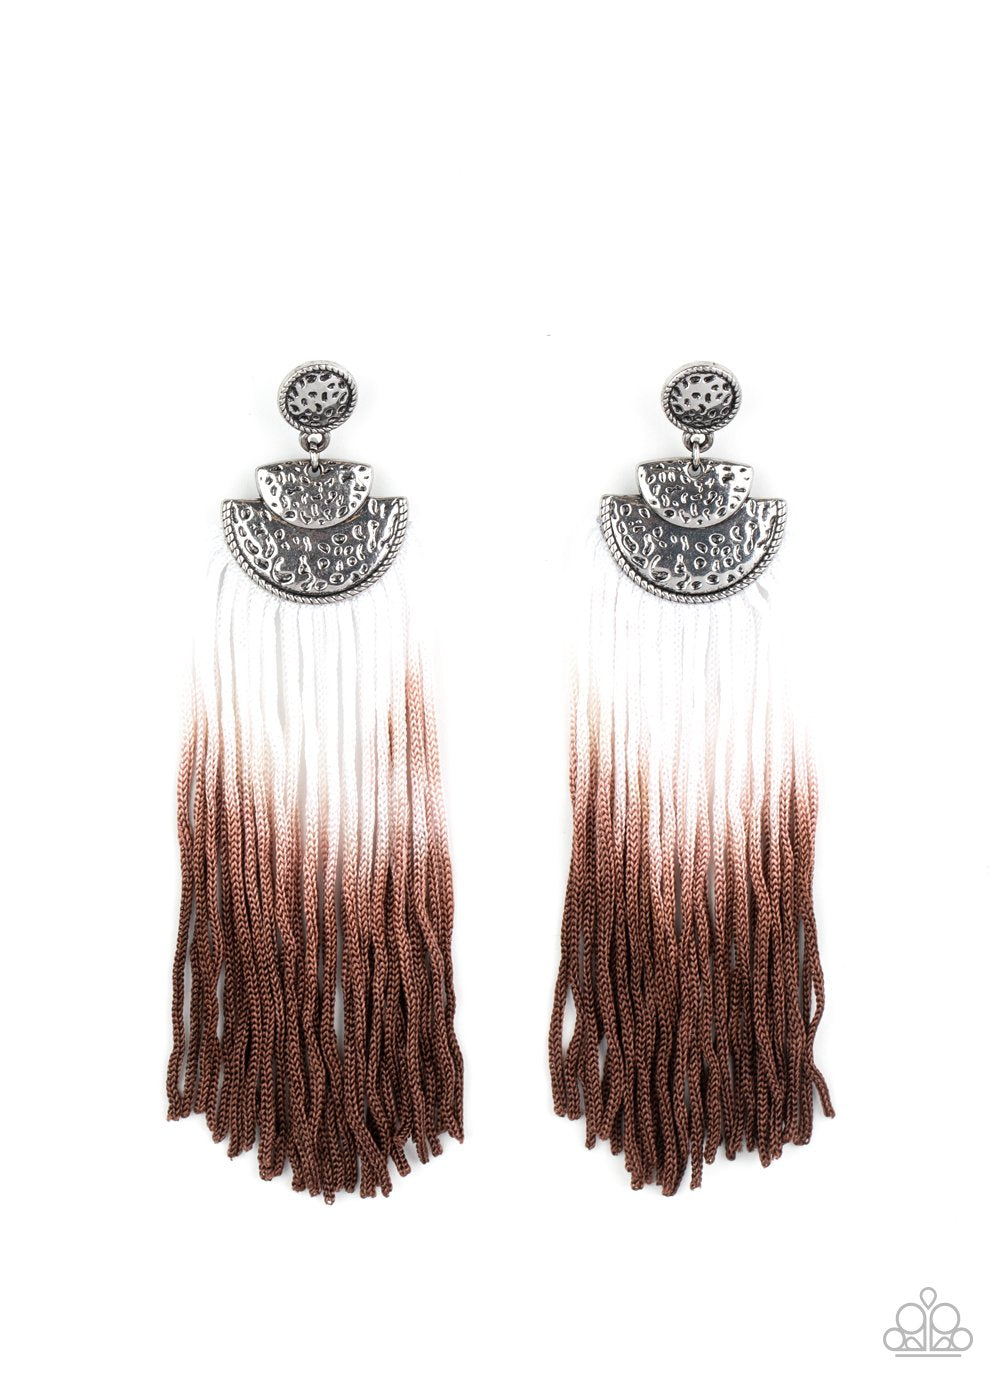 DIP It Up - Brown Fringe Earrings - Paparazzi Accessories - Gradually fading from white to brown, shiny cording streams from the bottom of hammered silver frames, creating a colorful fringe. Earring attaches to a standard post fitting. Sold as one pair of post earrings.